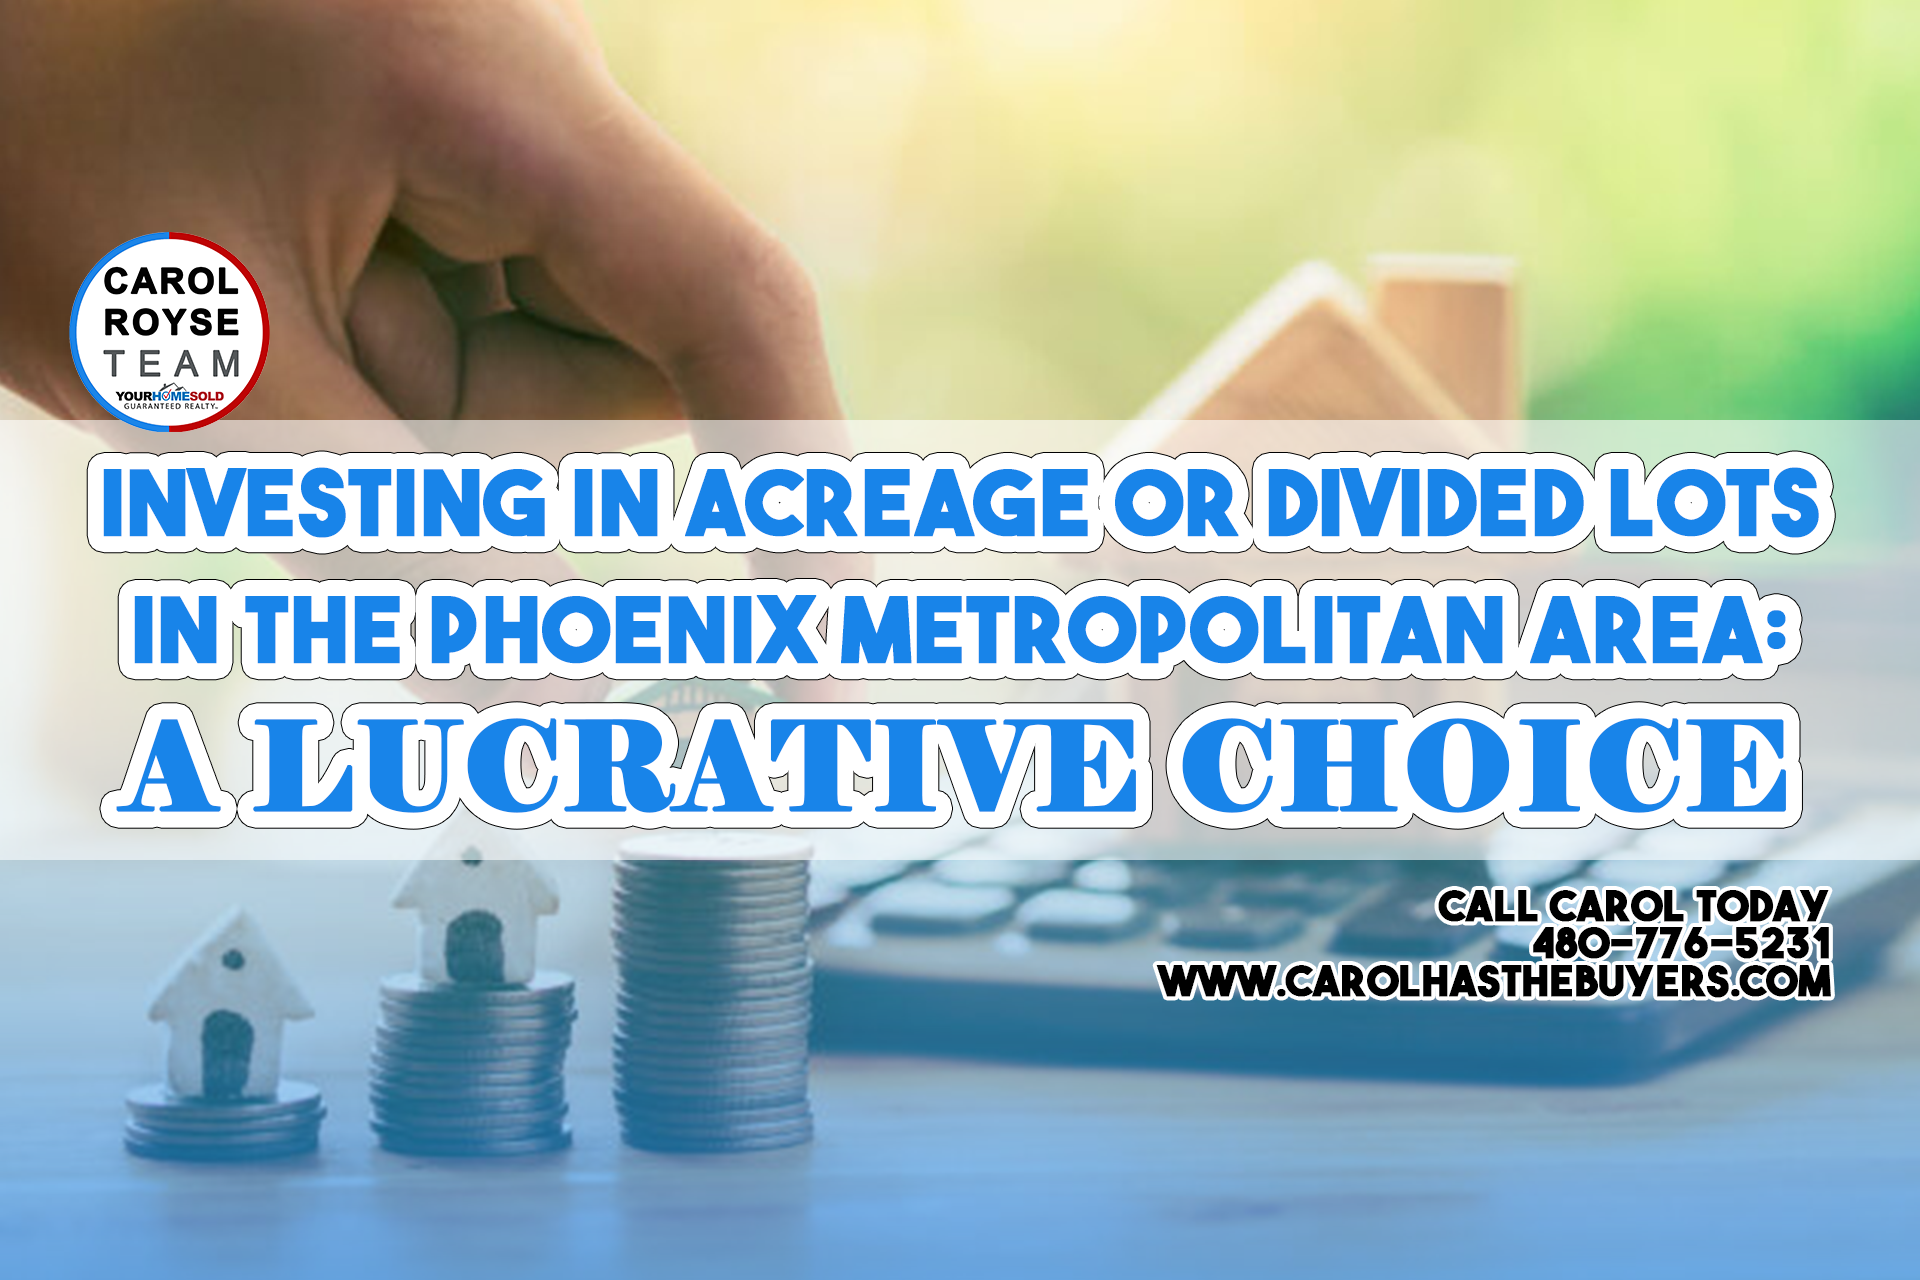 Investing in Acreage or Divided Lots in the Phoenix Metropolitan Area: A Lucrative Choice